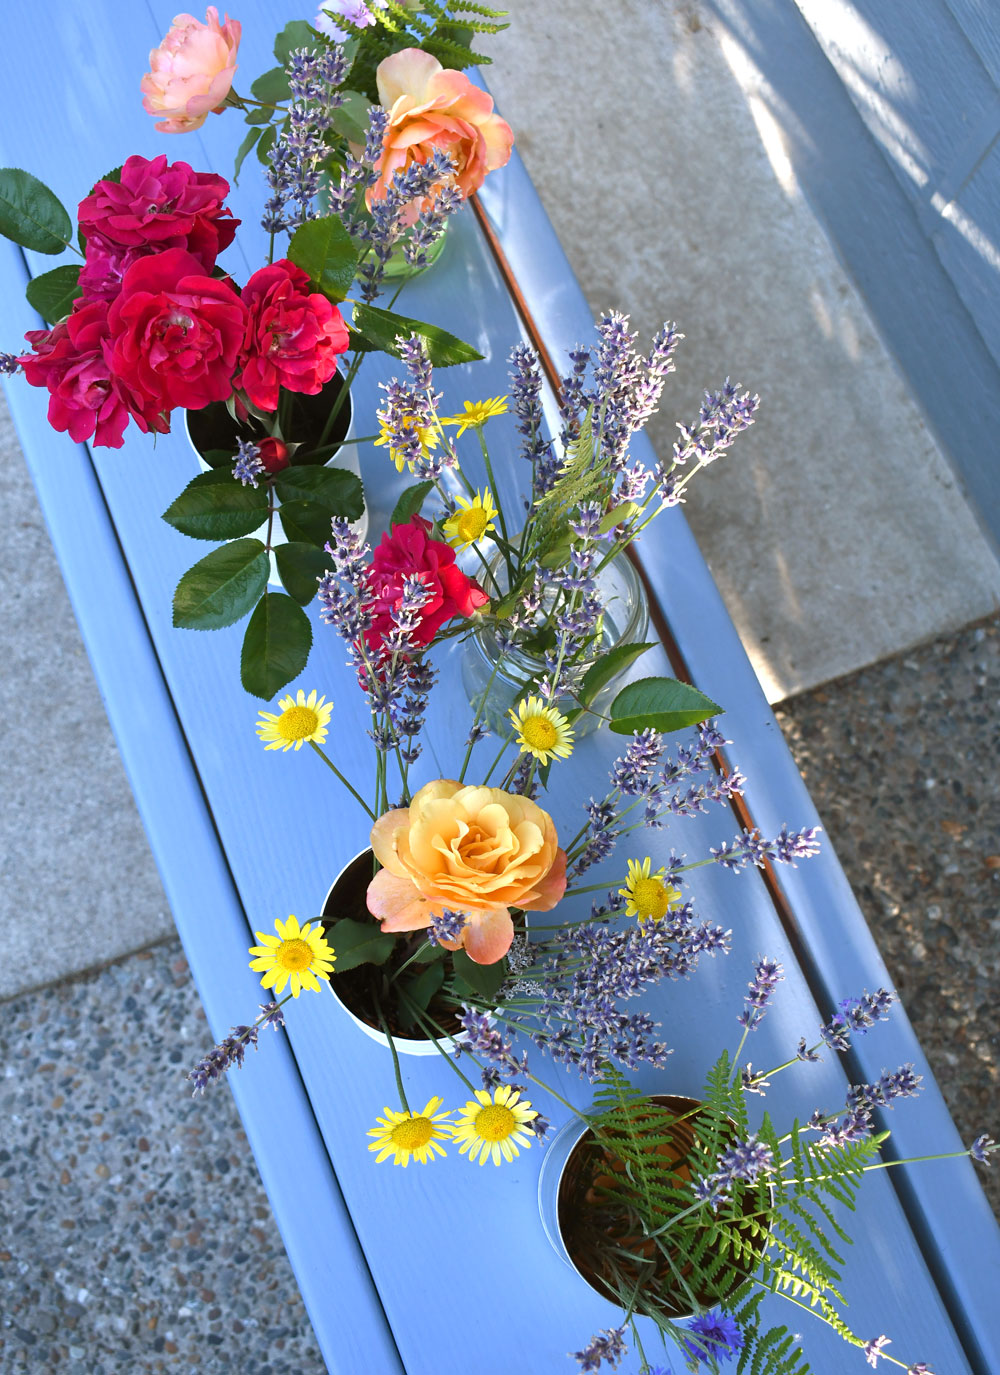 Make flower vases using recycled tin cans and glass jars